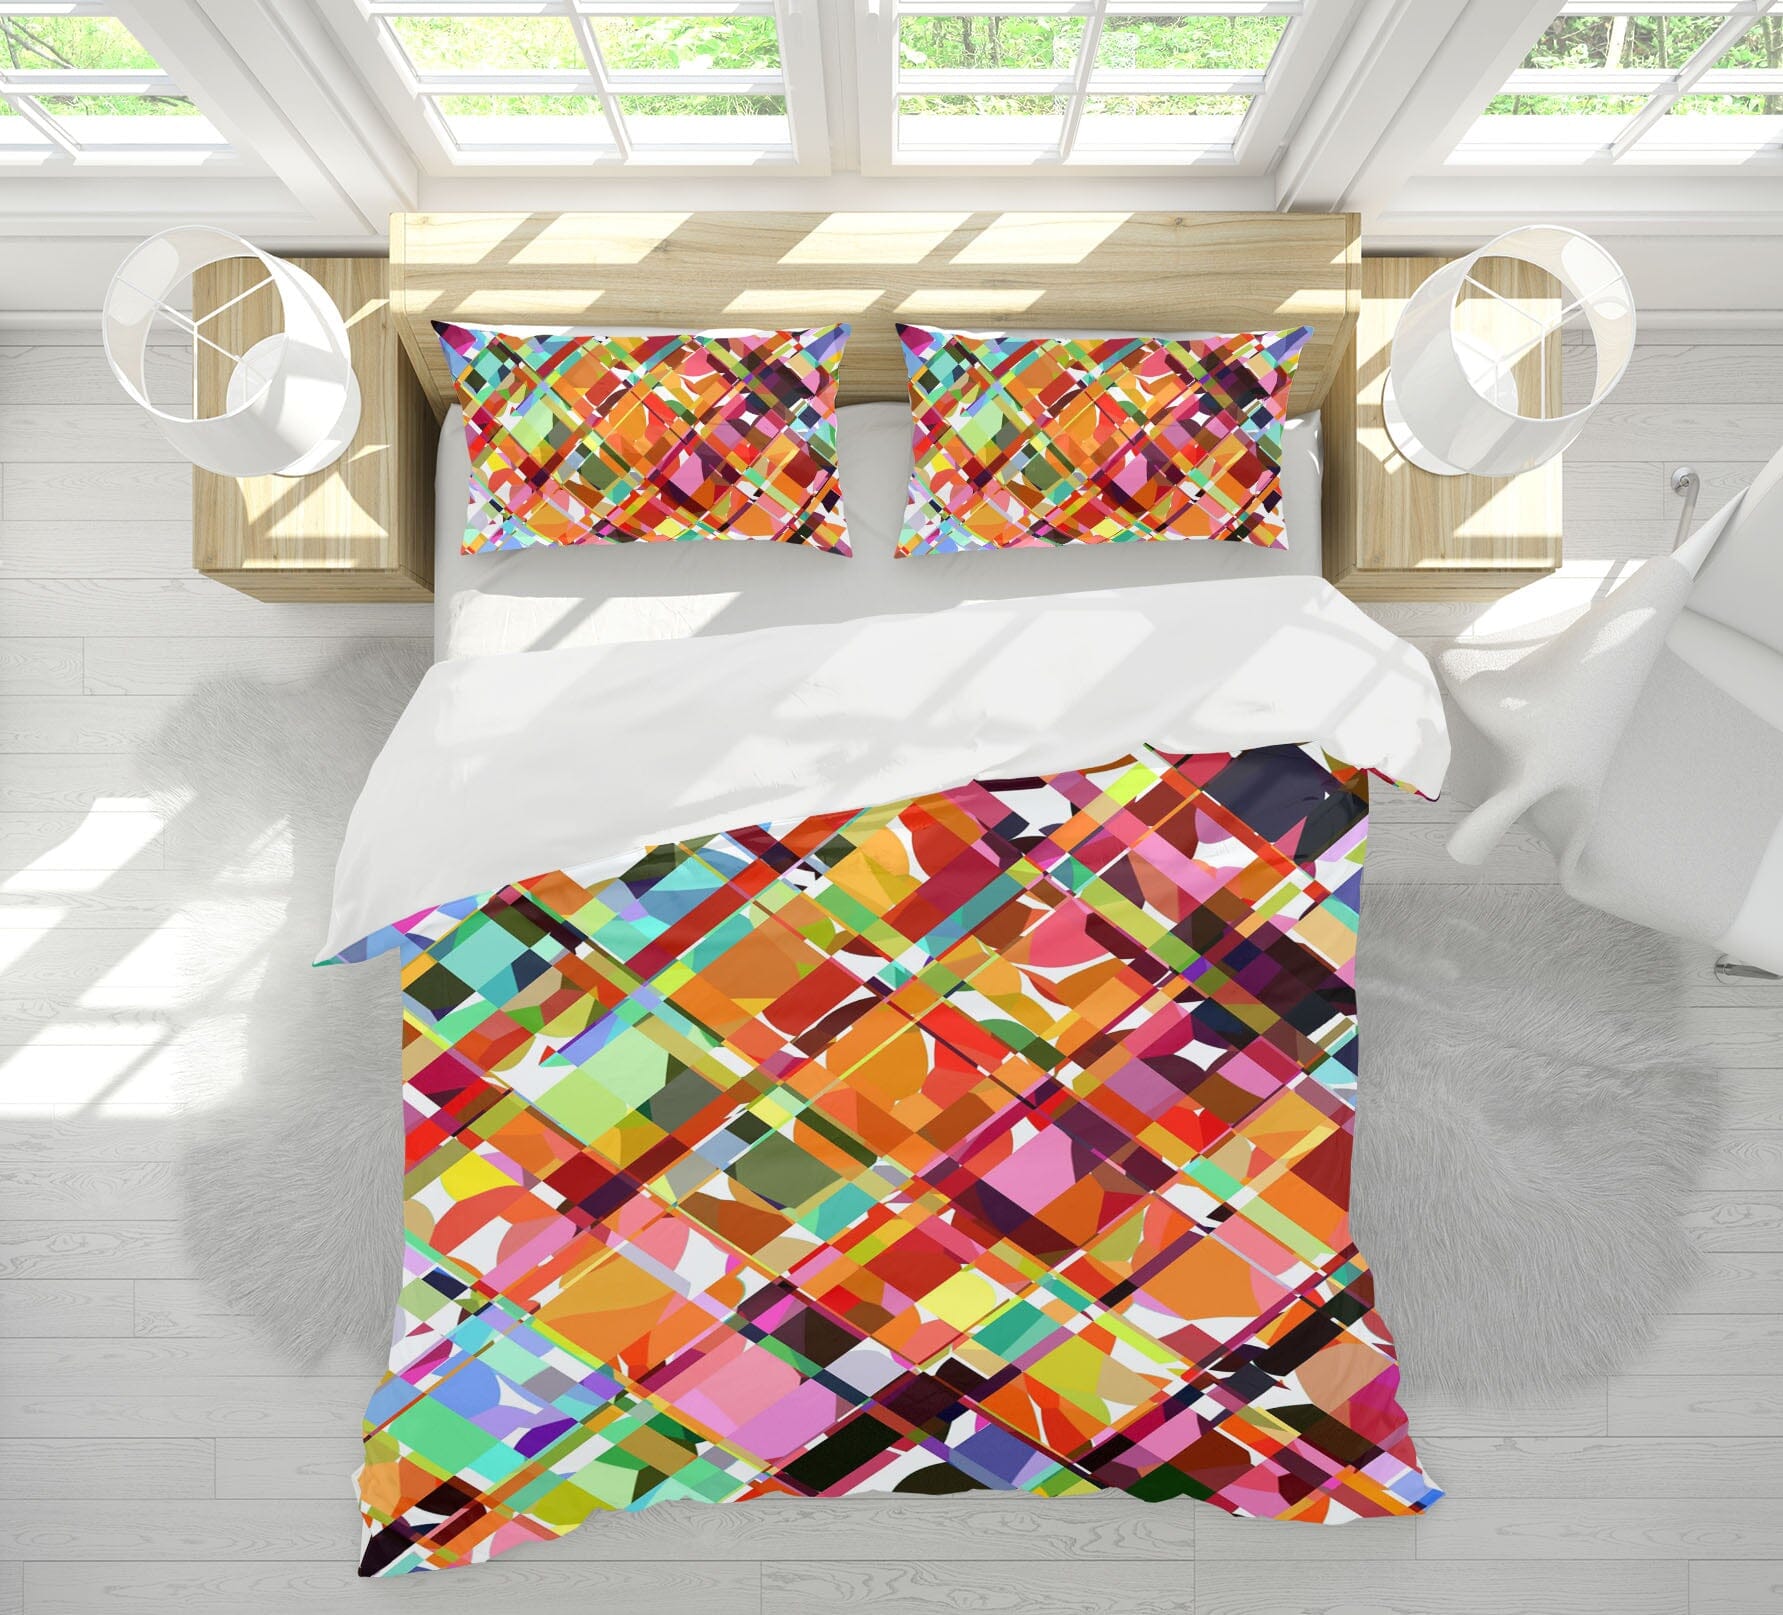 3D Dazzling Color 2004 Shandra Smith Bedding Bed Pillowcases Quilt Quiet Covers AJ Creativity Home 